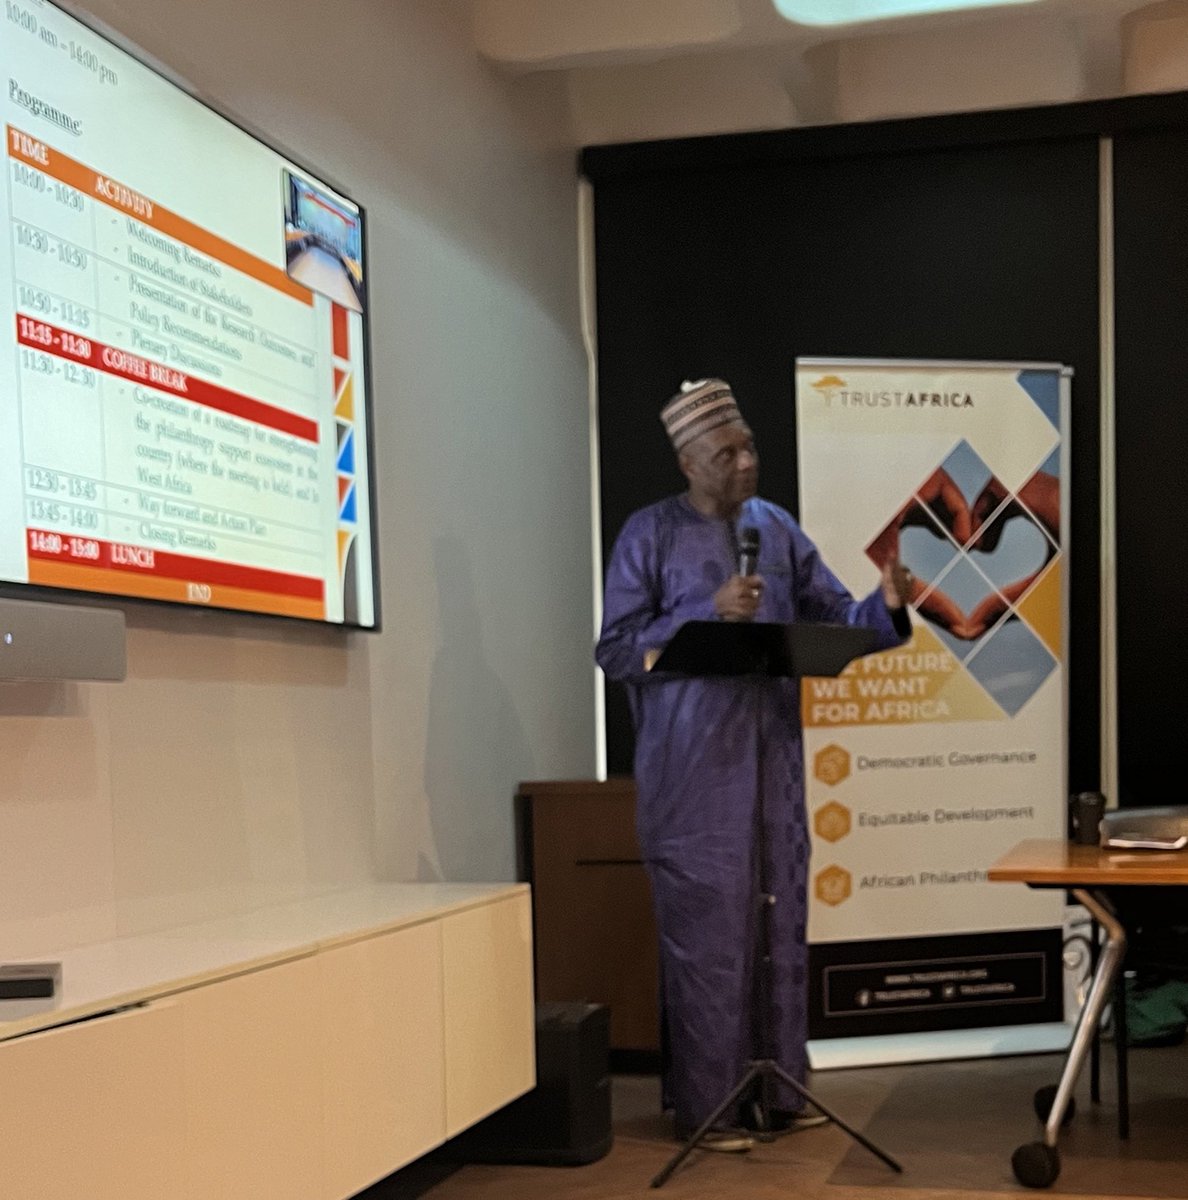 Amazing opening Remarks by Dr Ebrima Sall Executive Director of @TrustAfrica during today’s ongoing in-country meeting in Lagos, Nigeria, who addressed the issues of the philanthropy ecosystem in West Africa